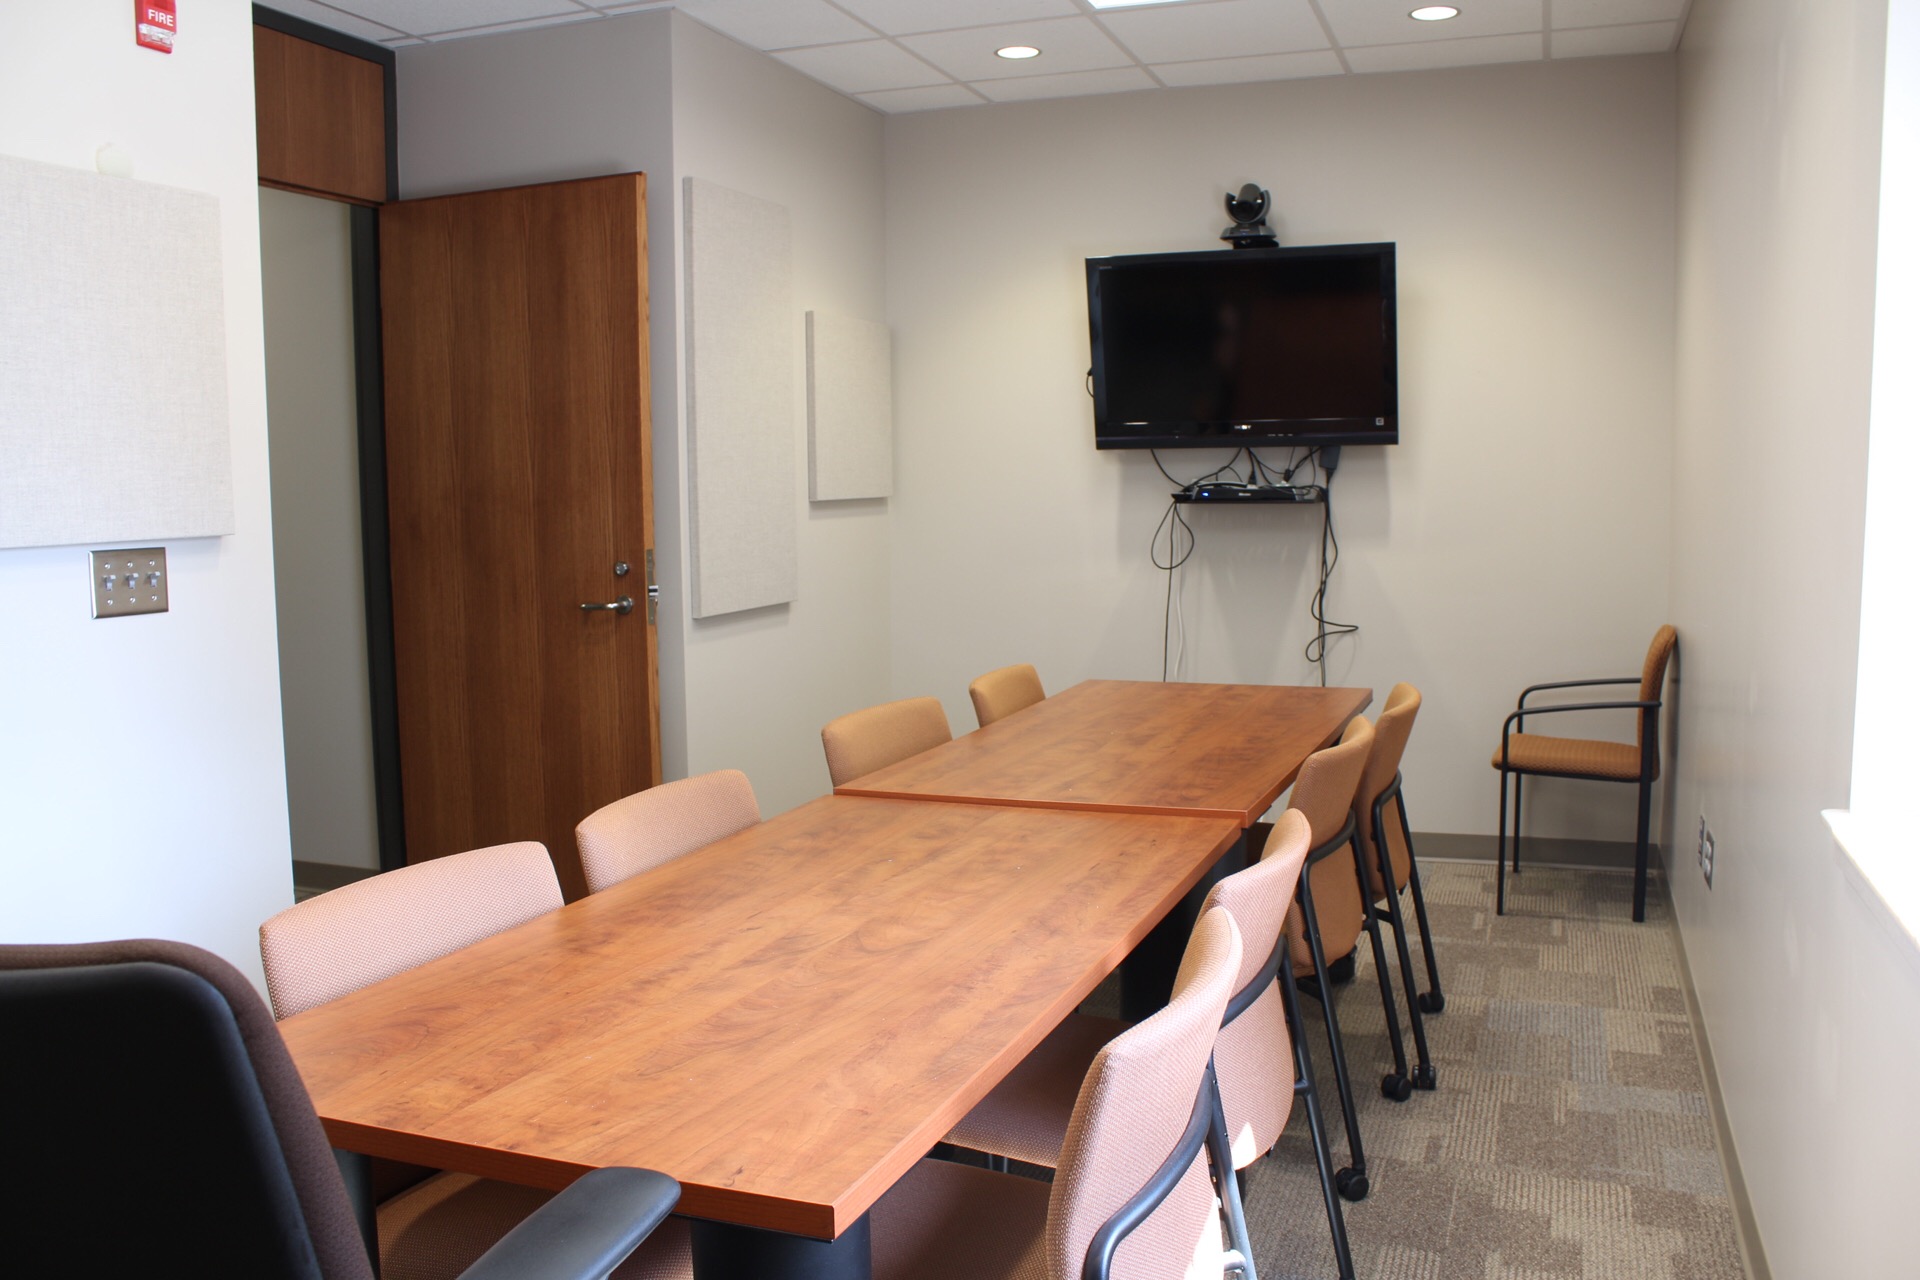 Jindra Conference Room with 2 tables, 10 chairs and wall mounted tv and vcr.